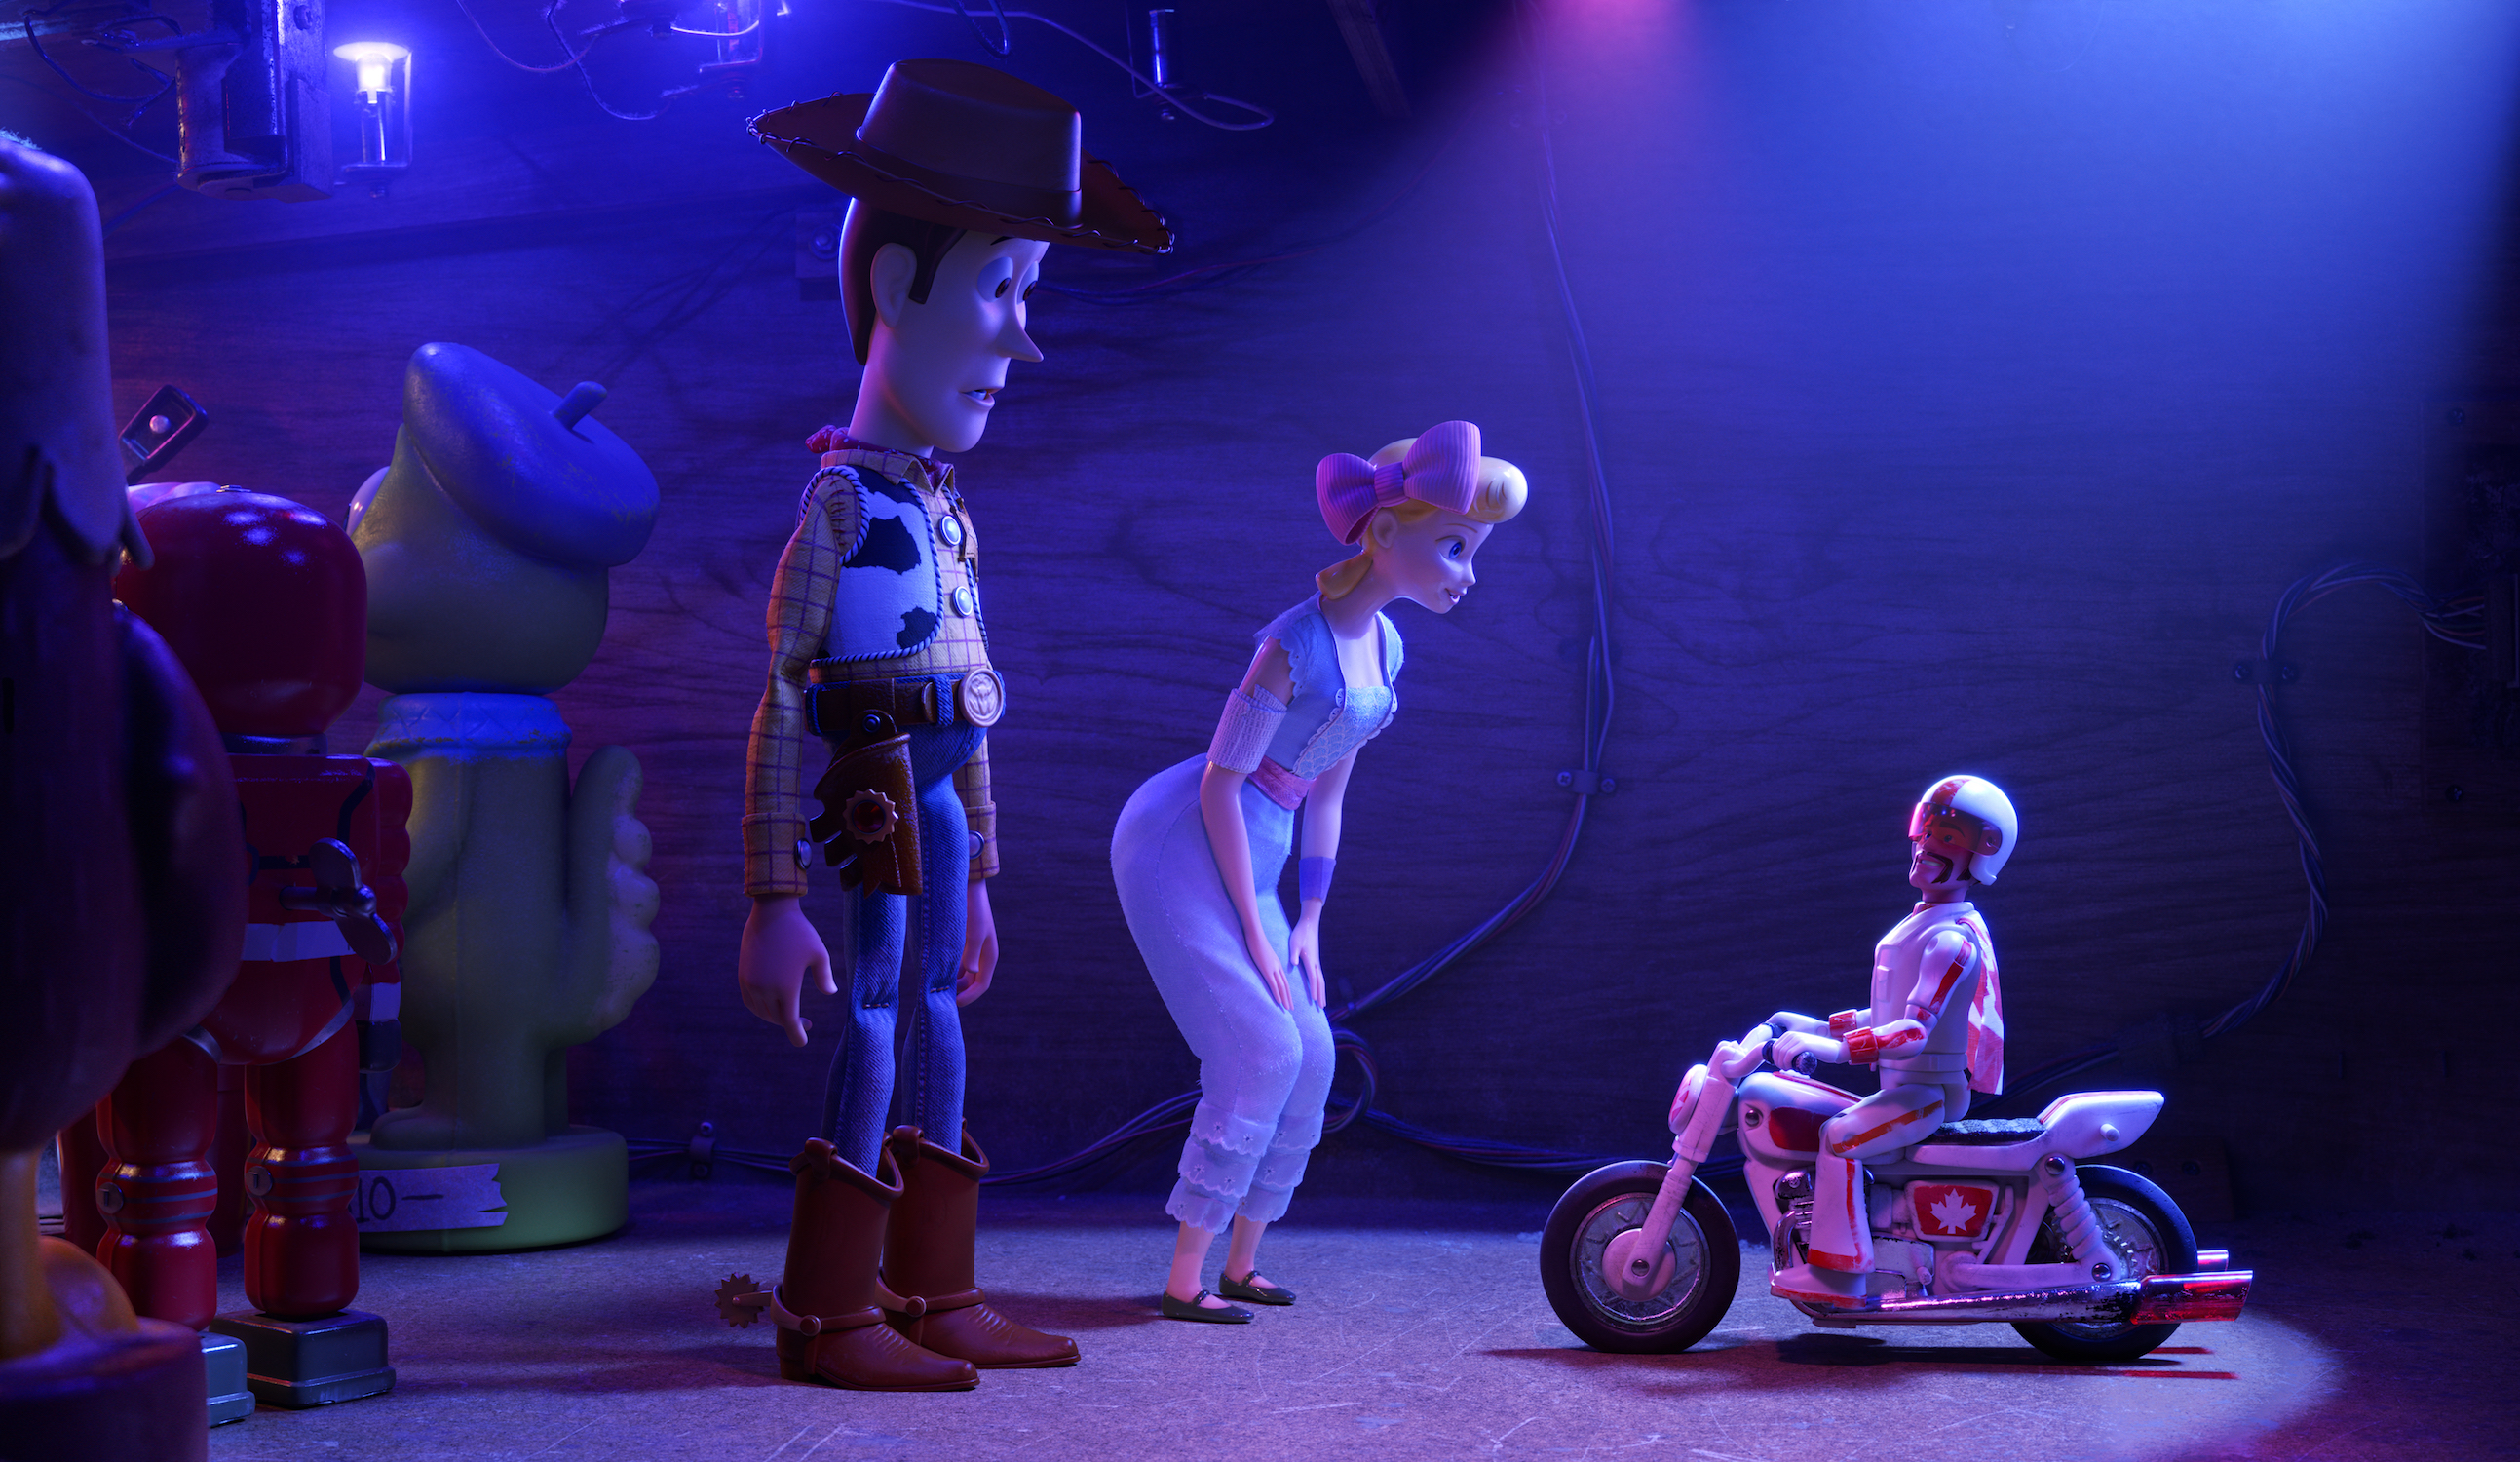 Movie Toy Story 4 HD Wallpaper | Background Image